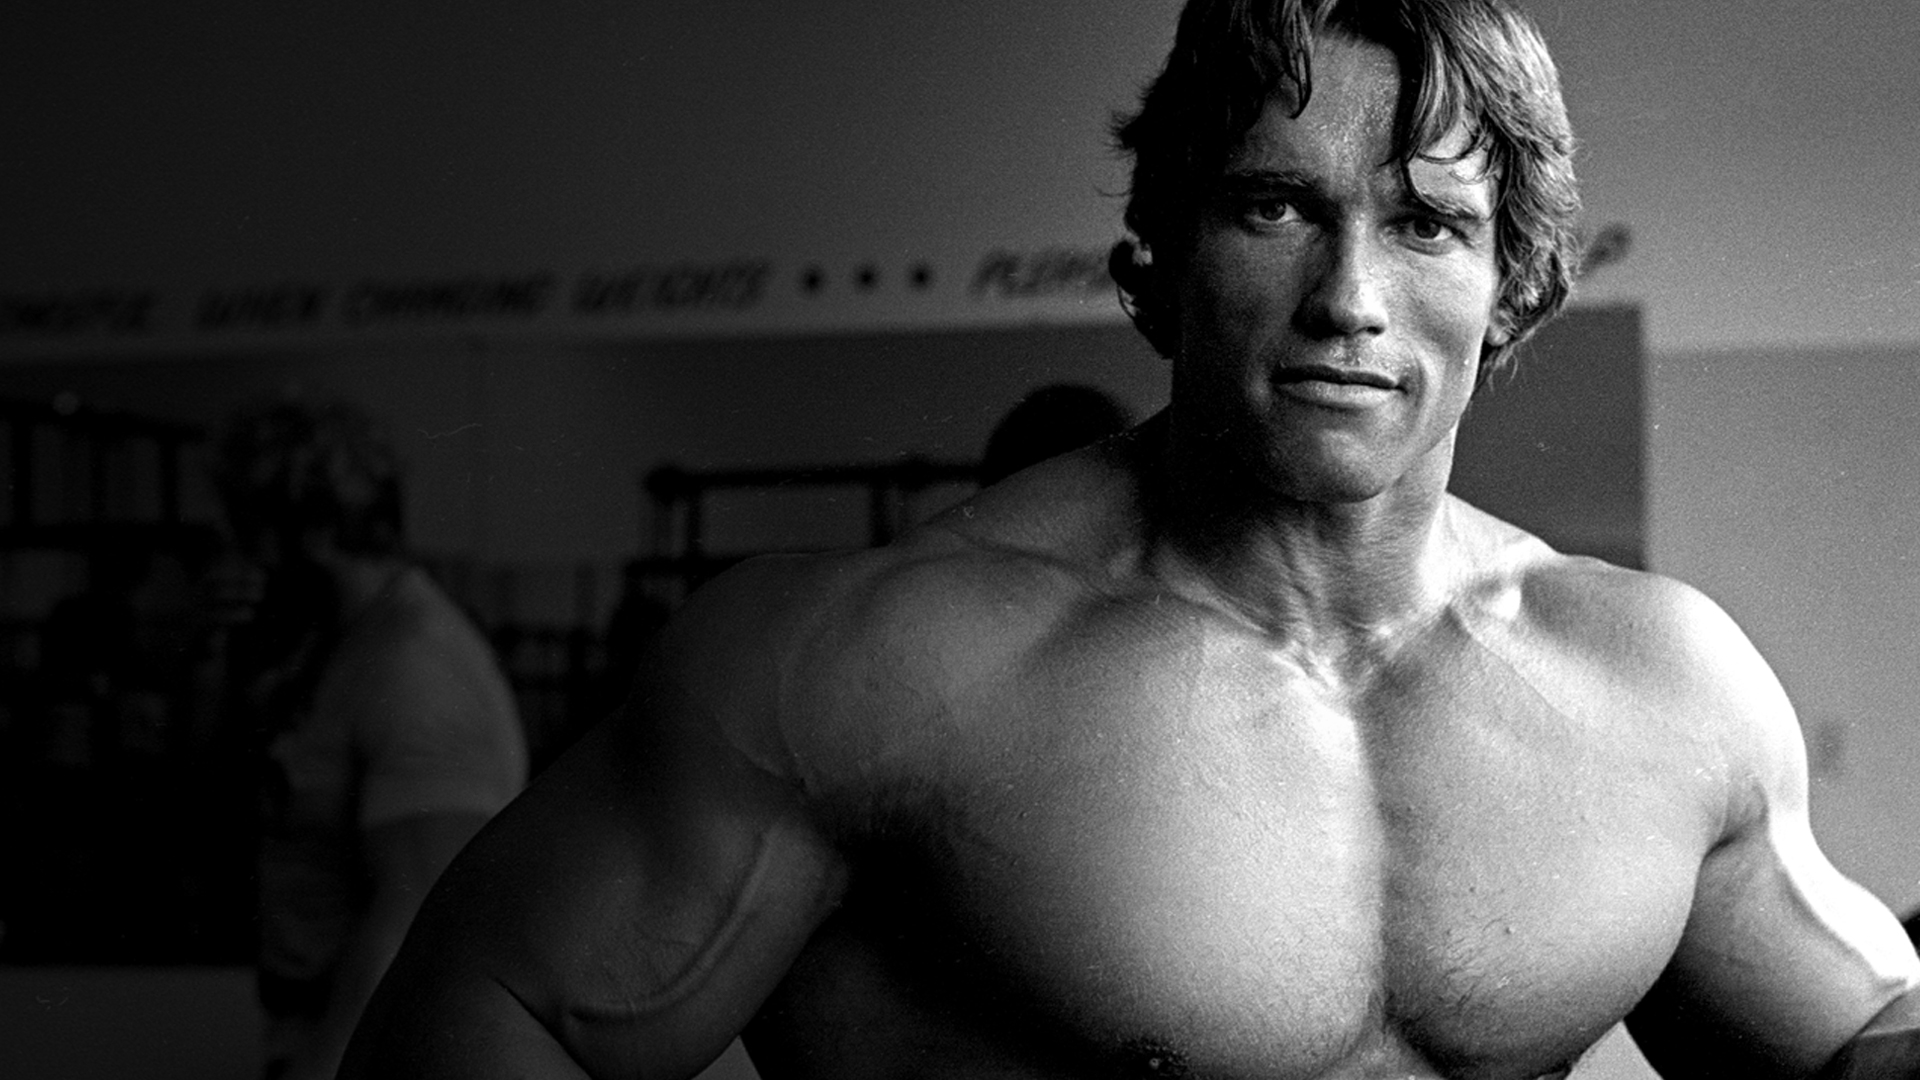 Is Arnold Schwarzenegger's Pumping Iron a Big Dramatic Charade?-  Bodybuilding Legend Exposed the Reality: “We Call It Always a Docudrama” -  EssentiallySports